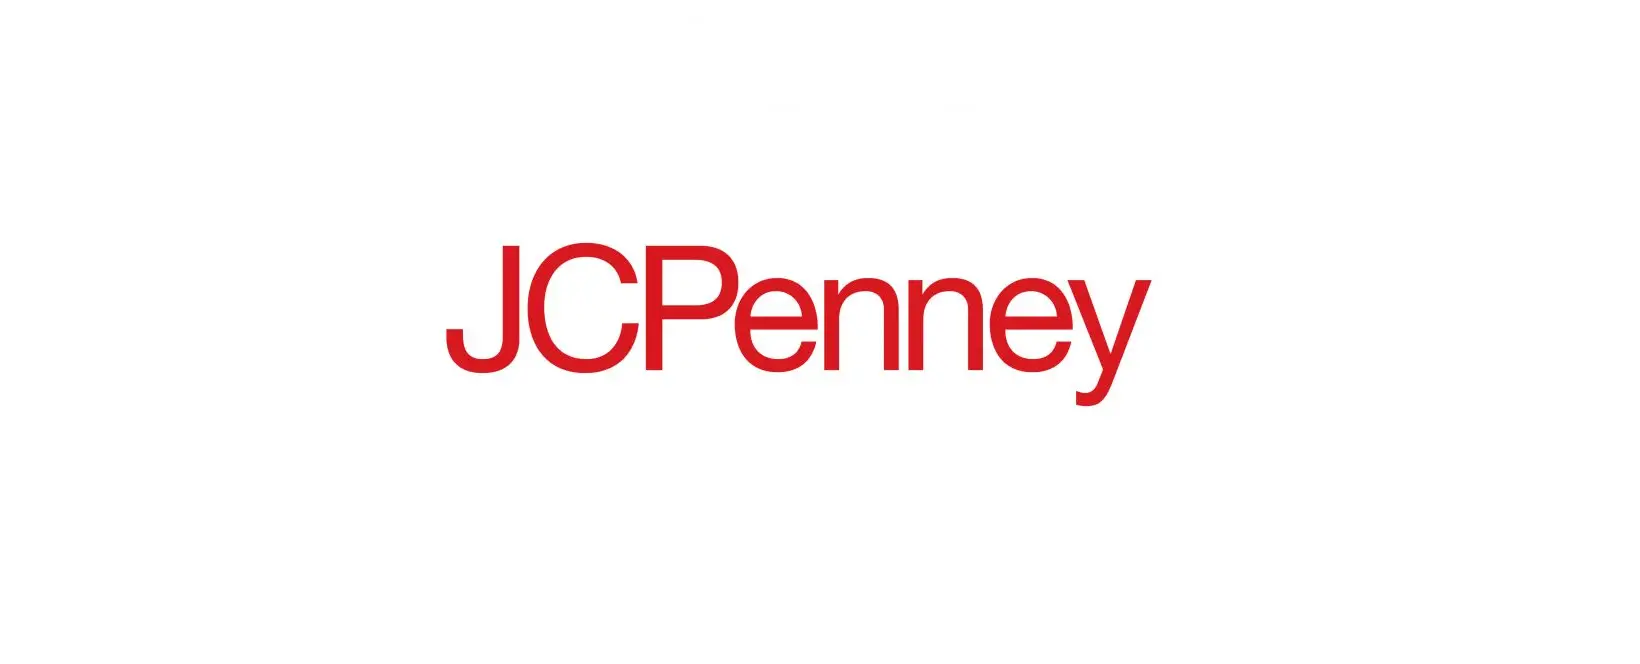 JCPenney Discount Code 2022